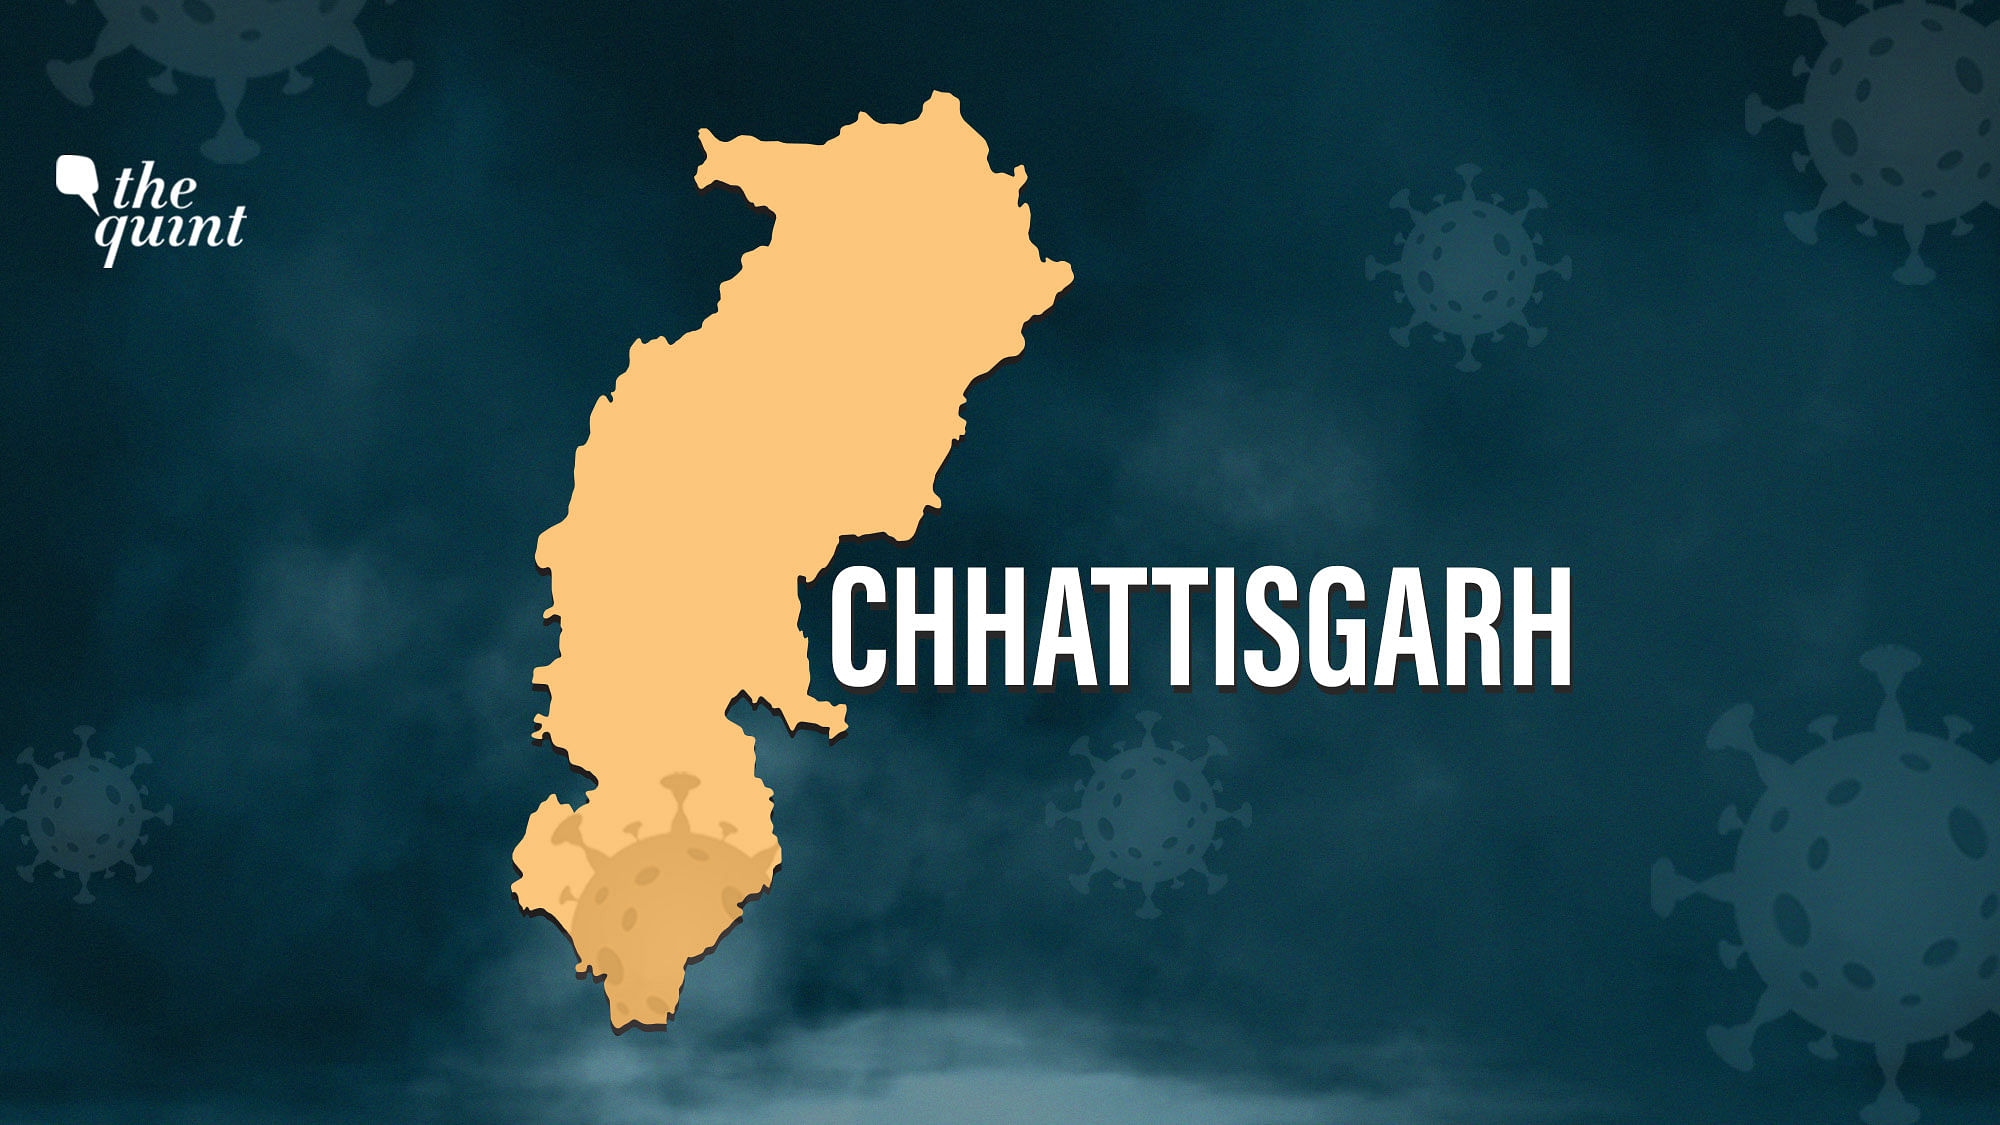 COVID-19 second wave has hit Chhattisgarh hard. With over 10,500 deaths and more than 1.25 lakh active cases across the state.